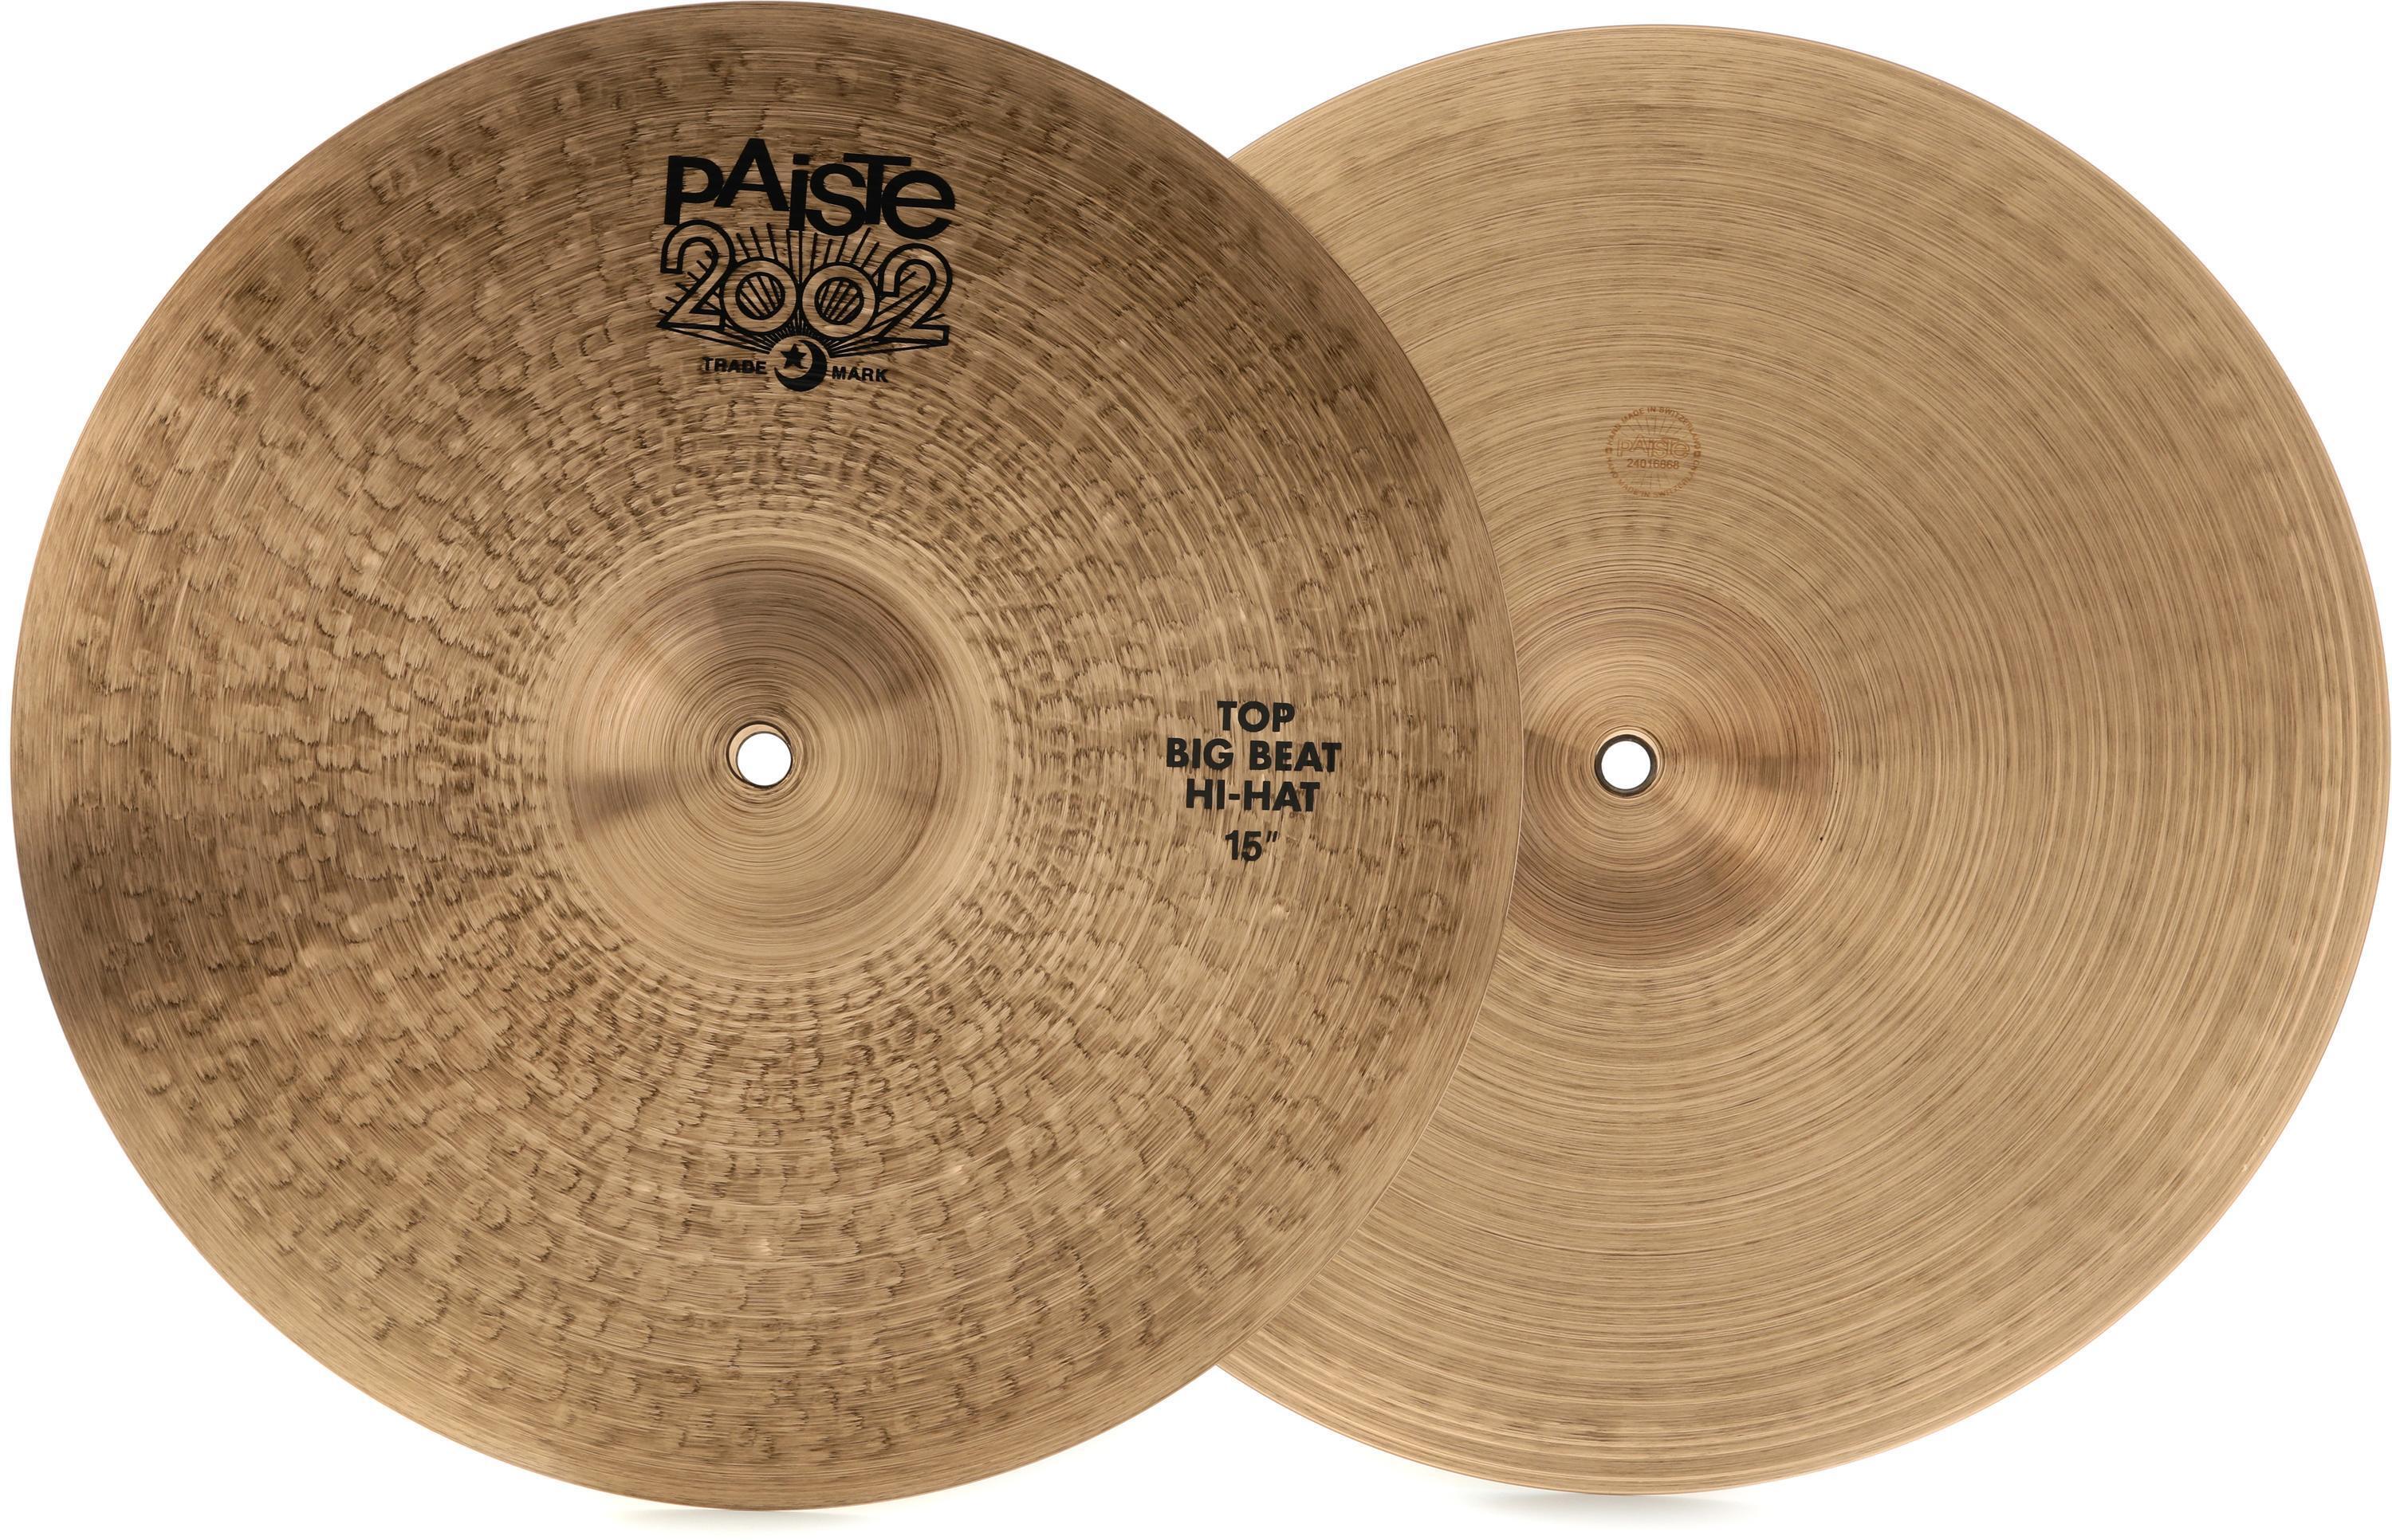 Paiste 15 inch 2002 Big Beat Hi-hat Cymbals | Sweetwater